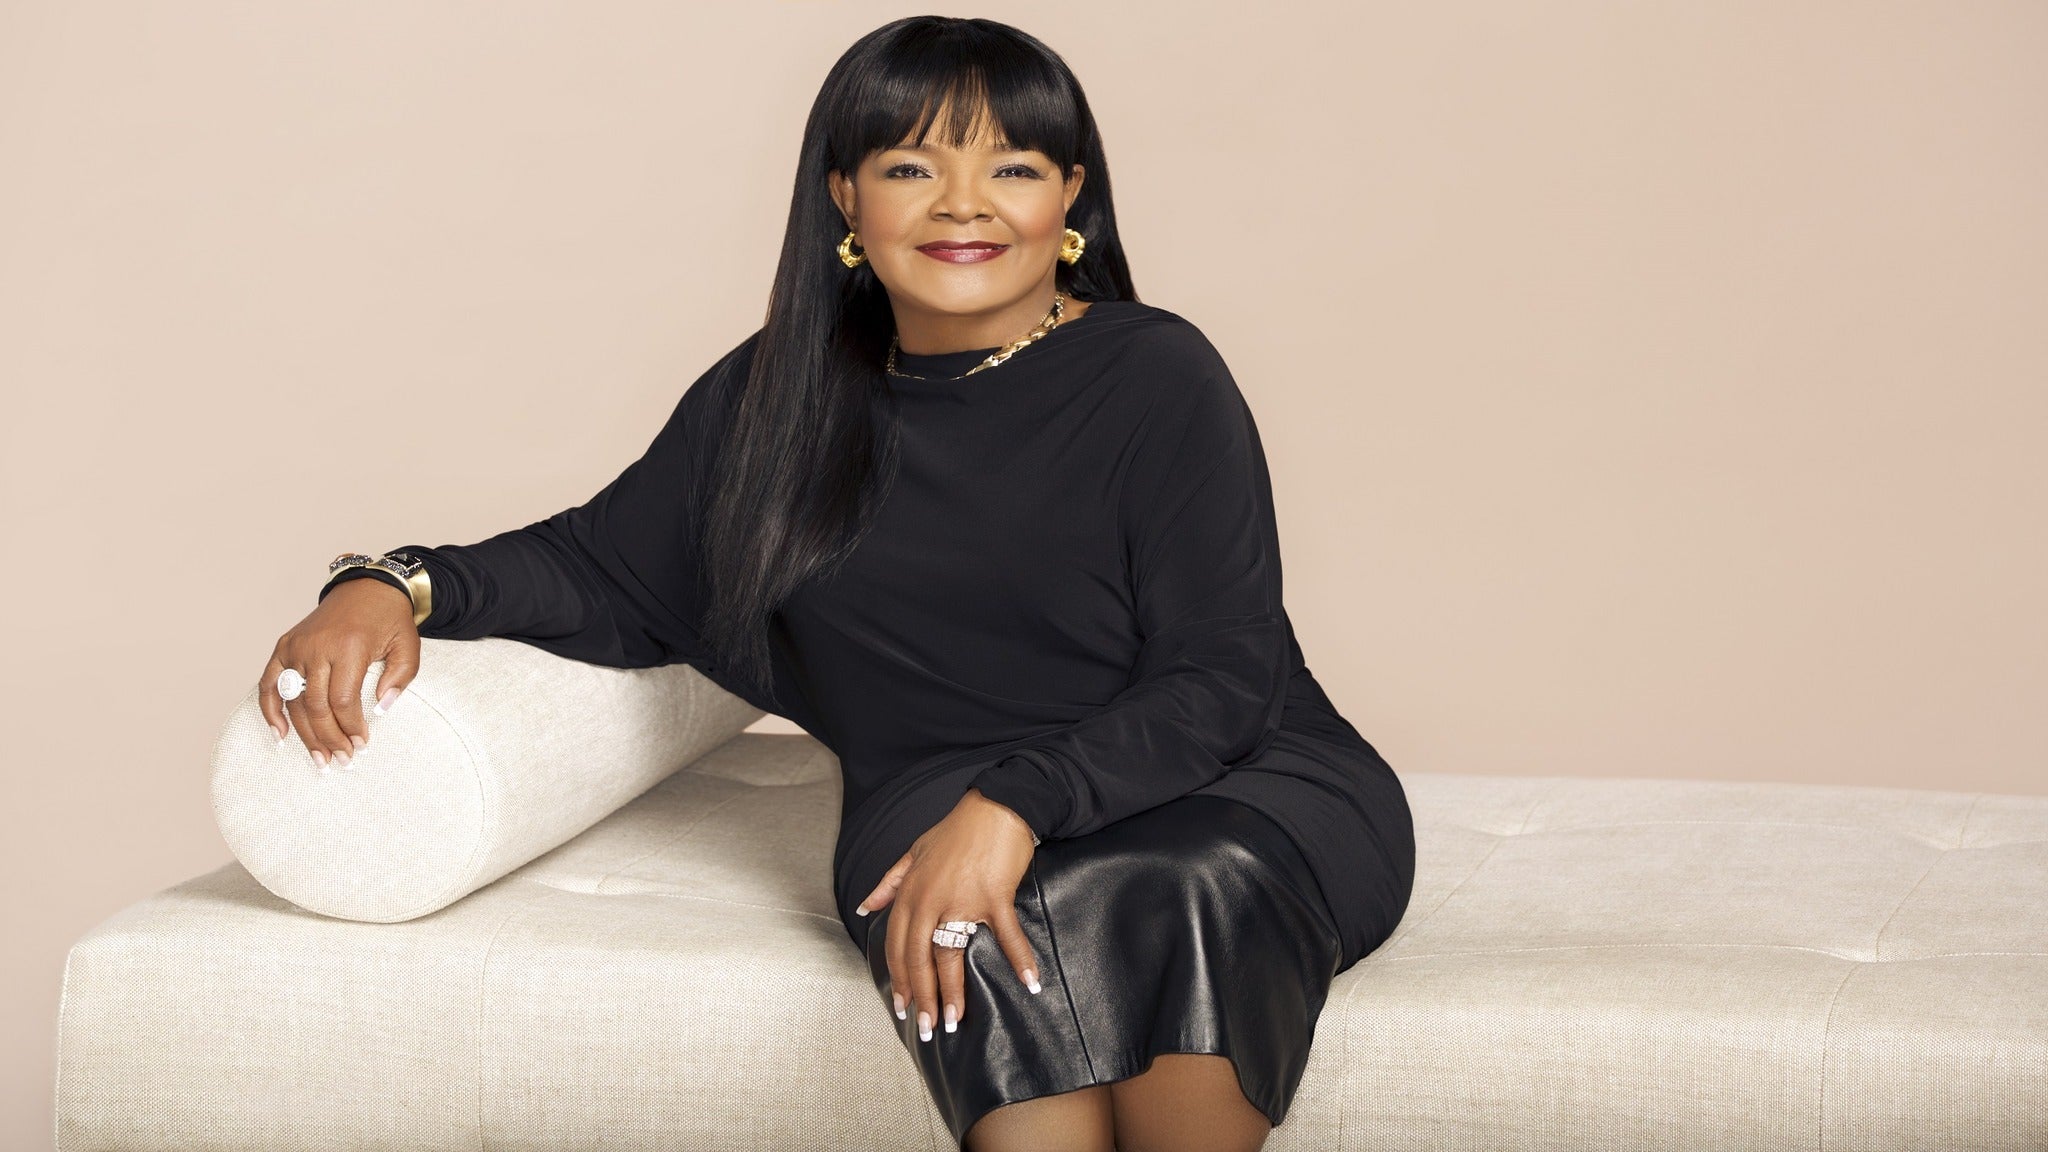 Shirley Caesar presale password for early tickets in Raleigh